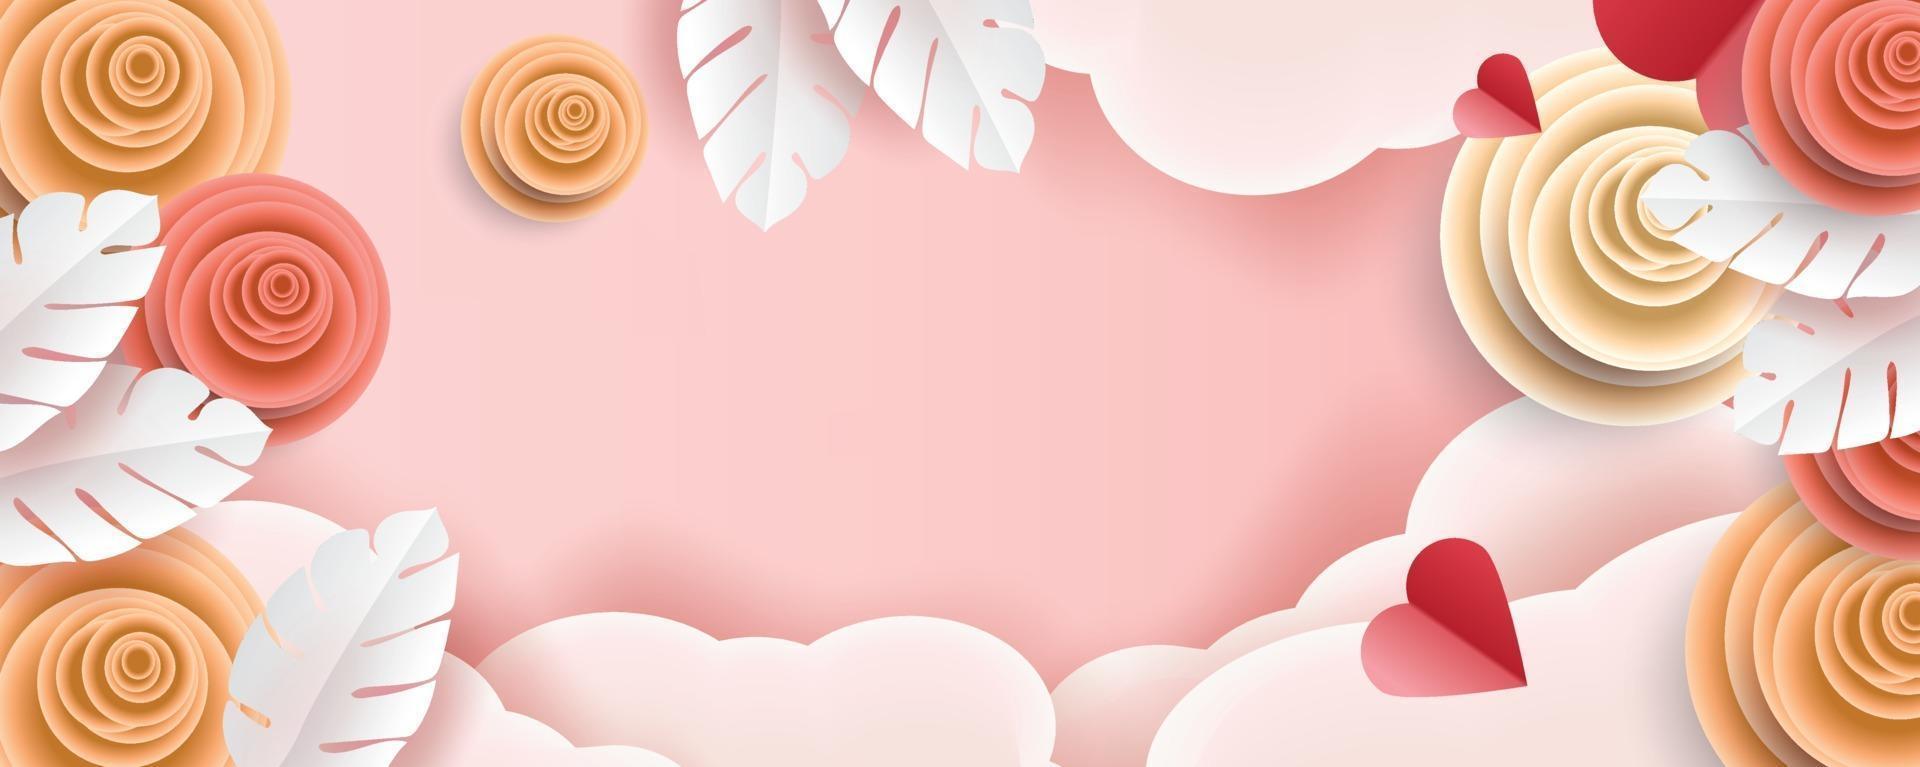 Spring pink background with beautiful colorful paper art flower vector